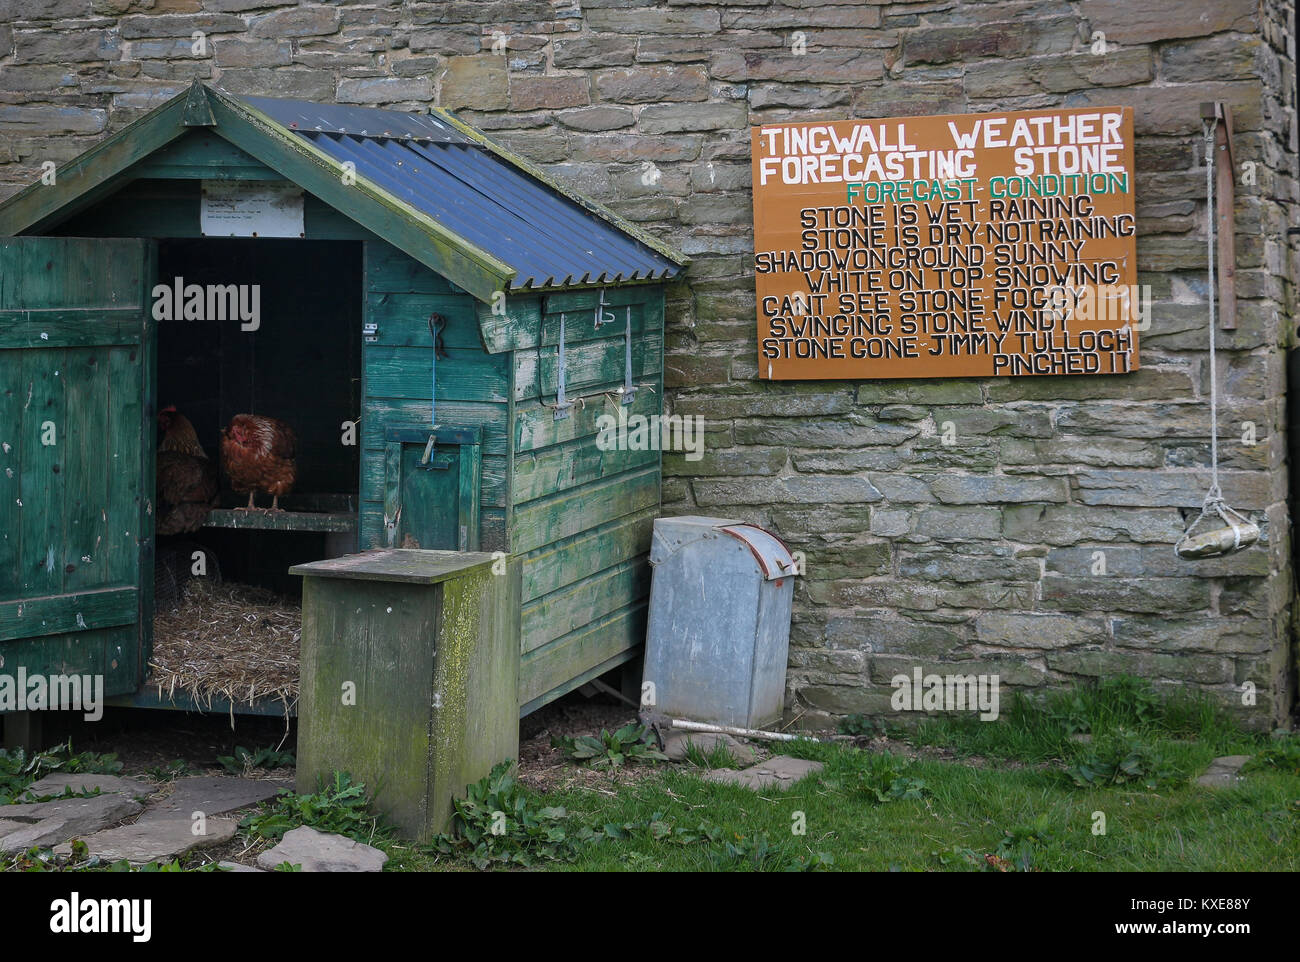 The Weather Forecasting Stone at Tingwall, Orkney Island, Scotland provides a humorous account of weather prediction for passersbys, resident rooster. Stock Photo